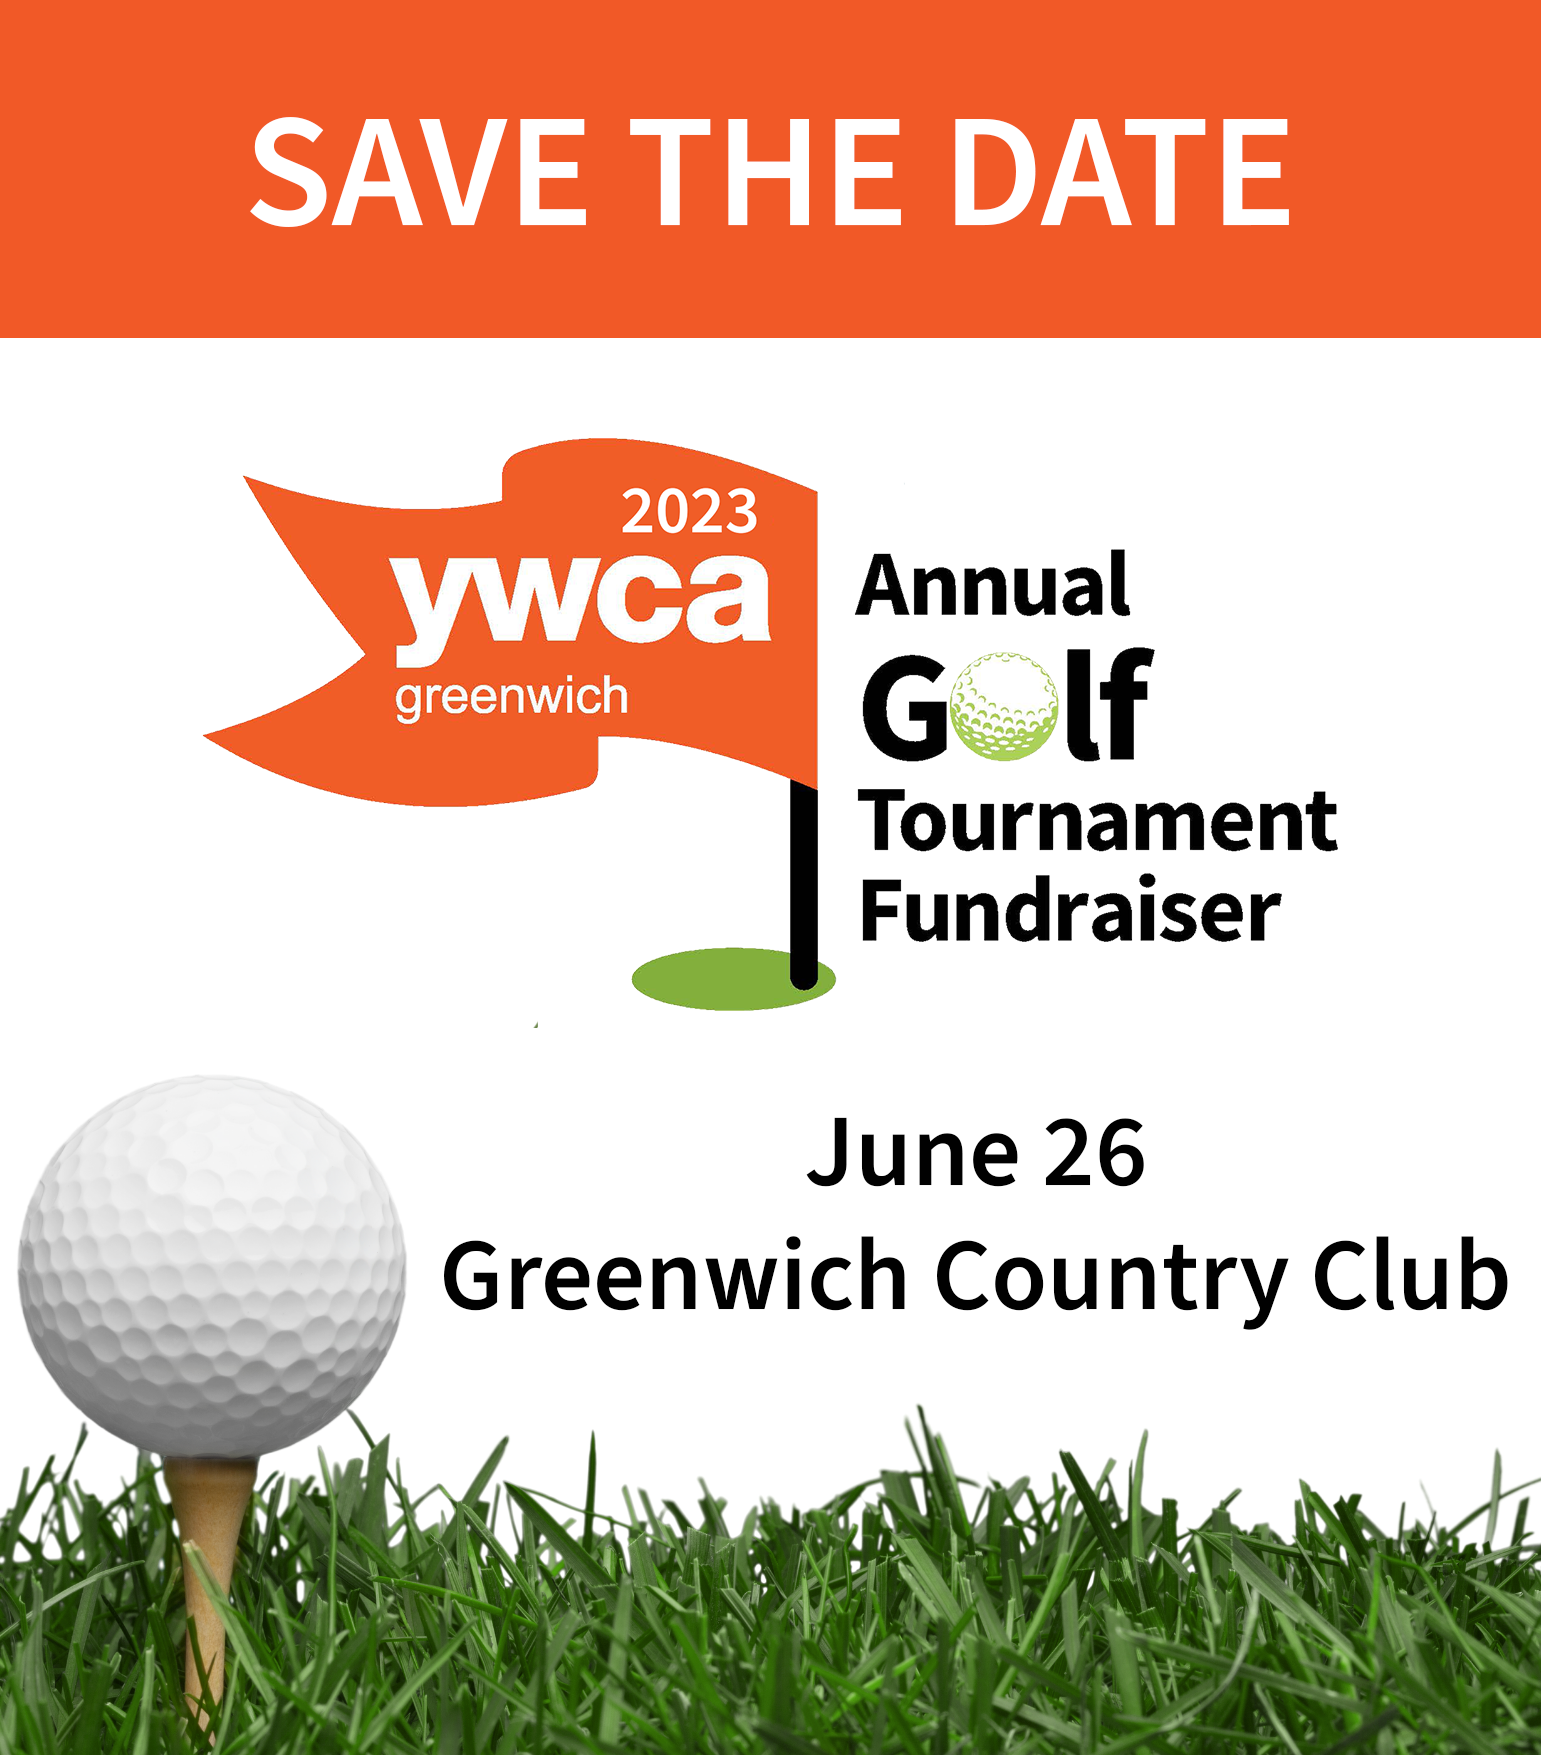 Golf Save the Date